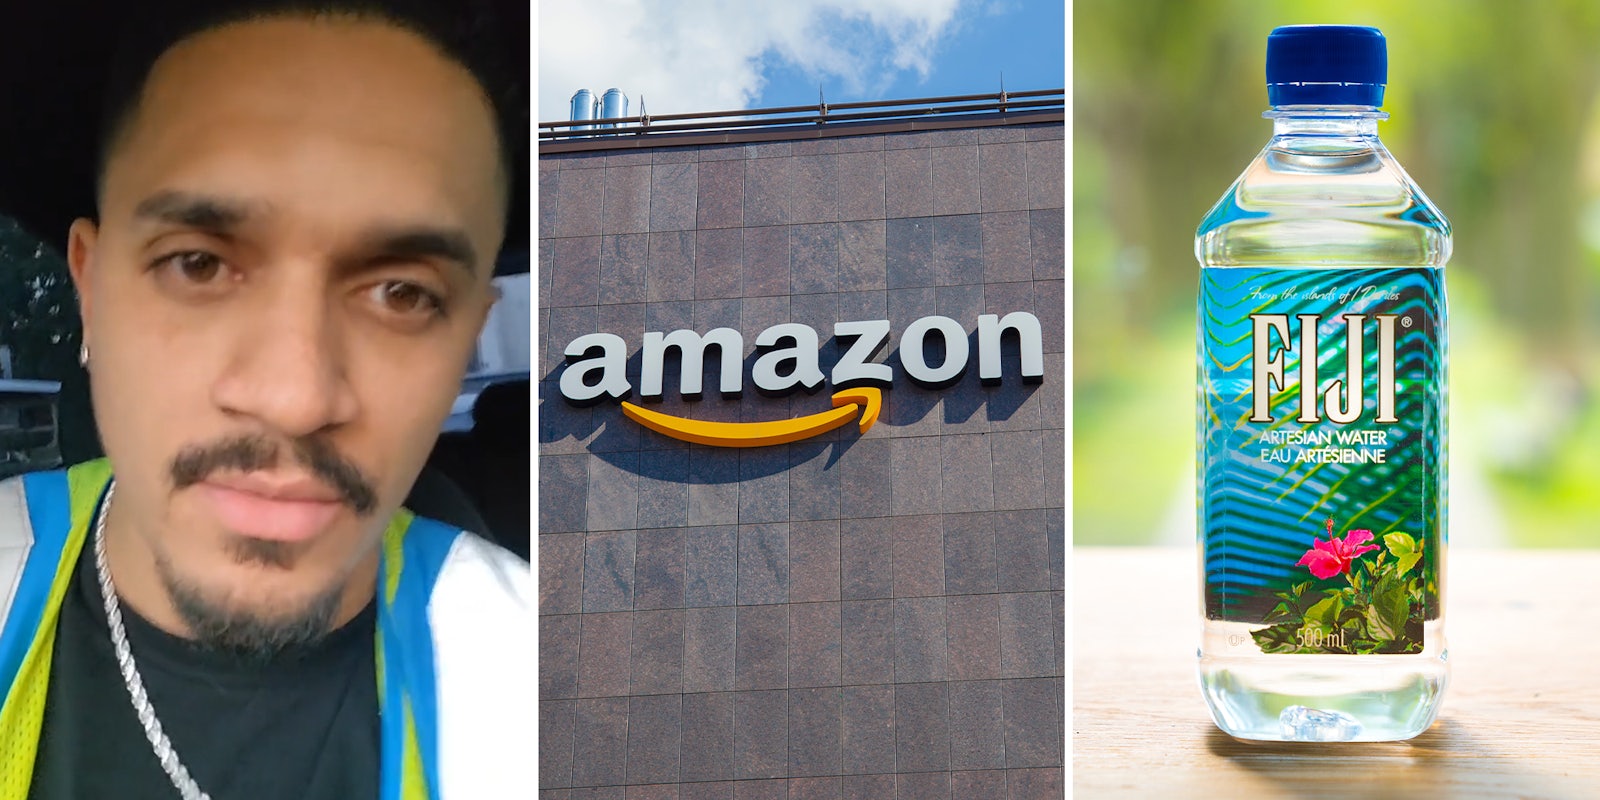 Amazon delivery driver demands you stop ordering heavy items, says he will get revenge if you do